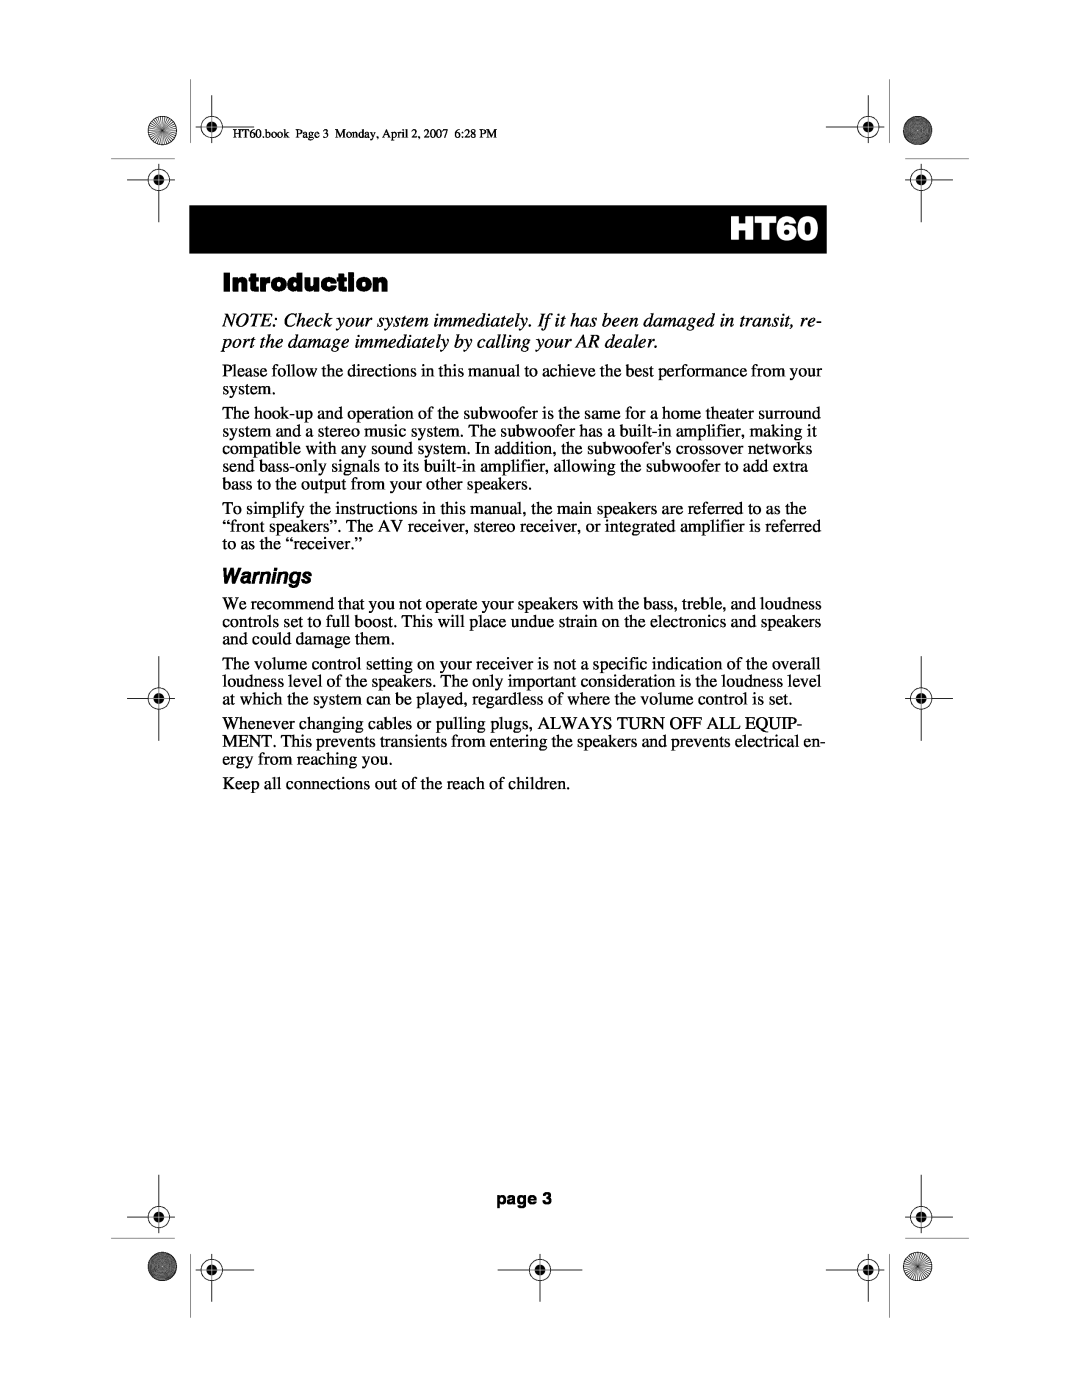 Acoustic Research HT60 operation manual Introduction, Warnings, page 